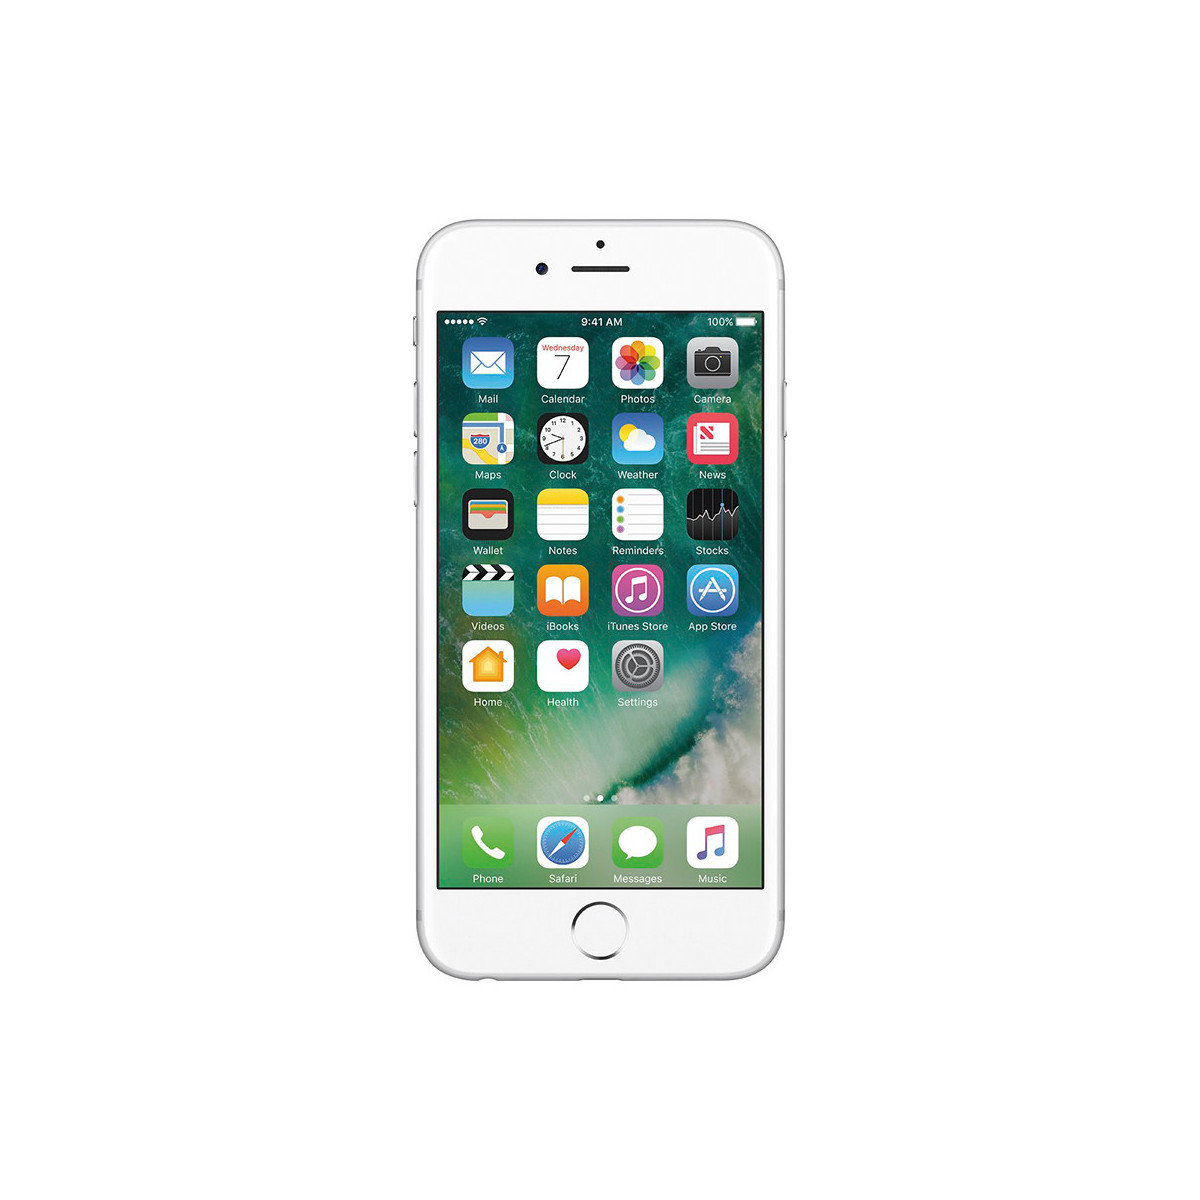 Apple - iPhone 6s Silver